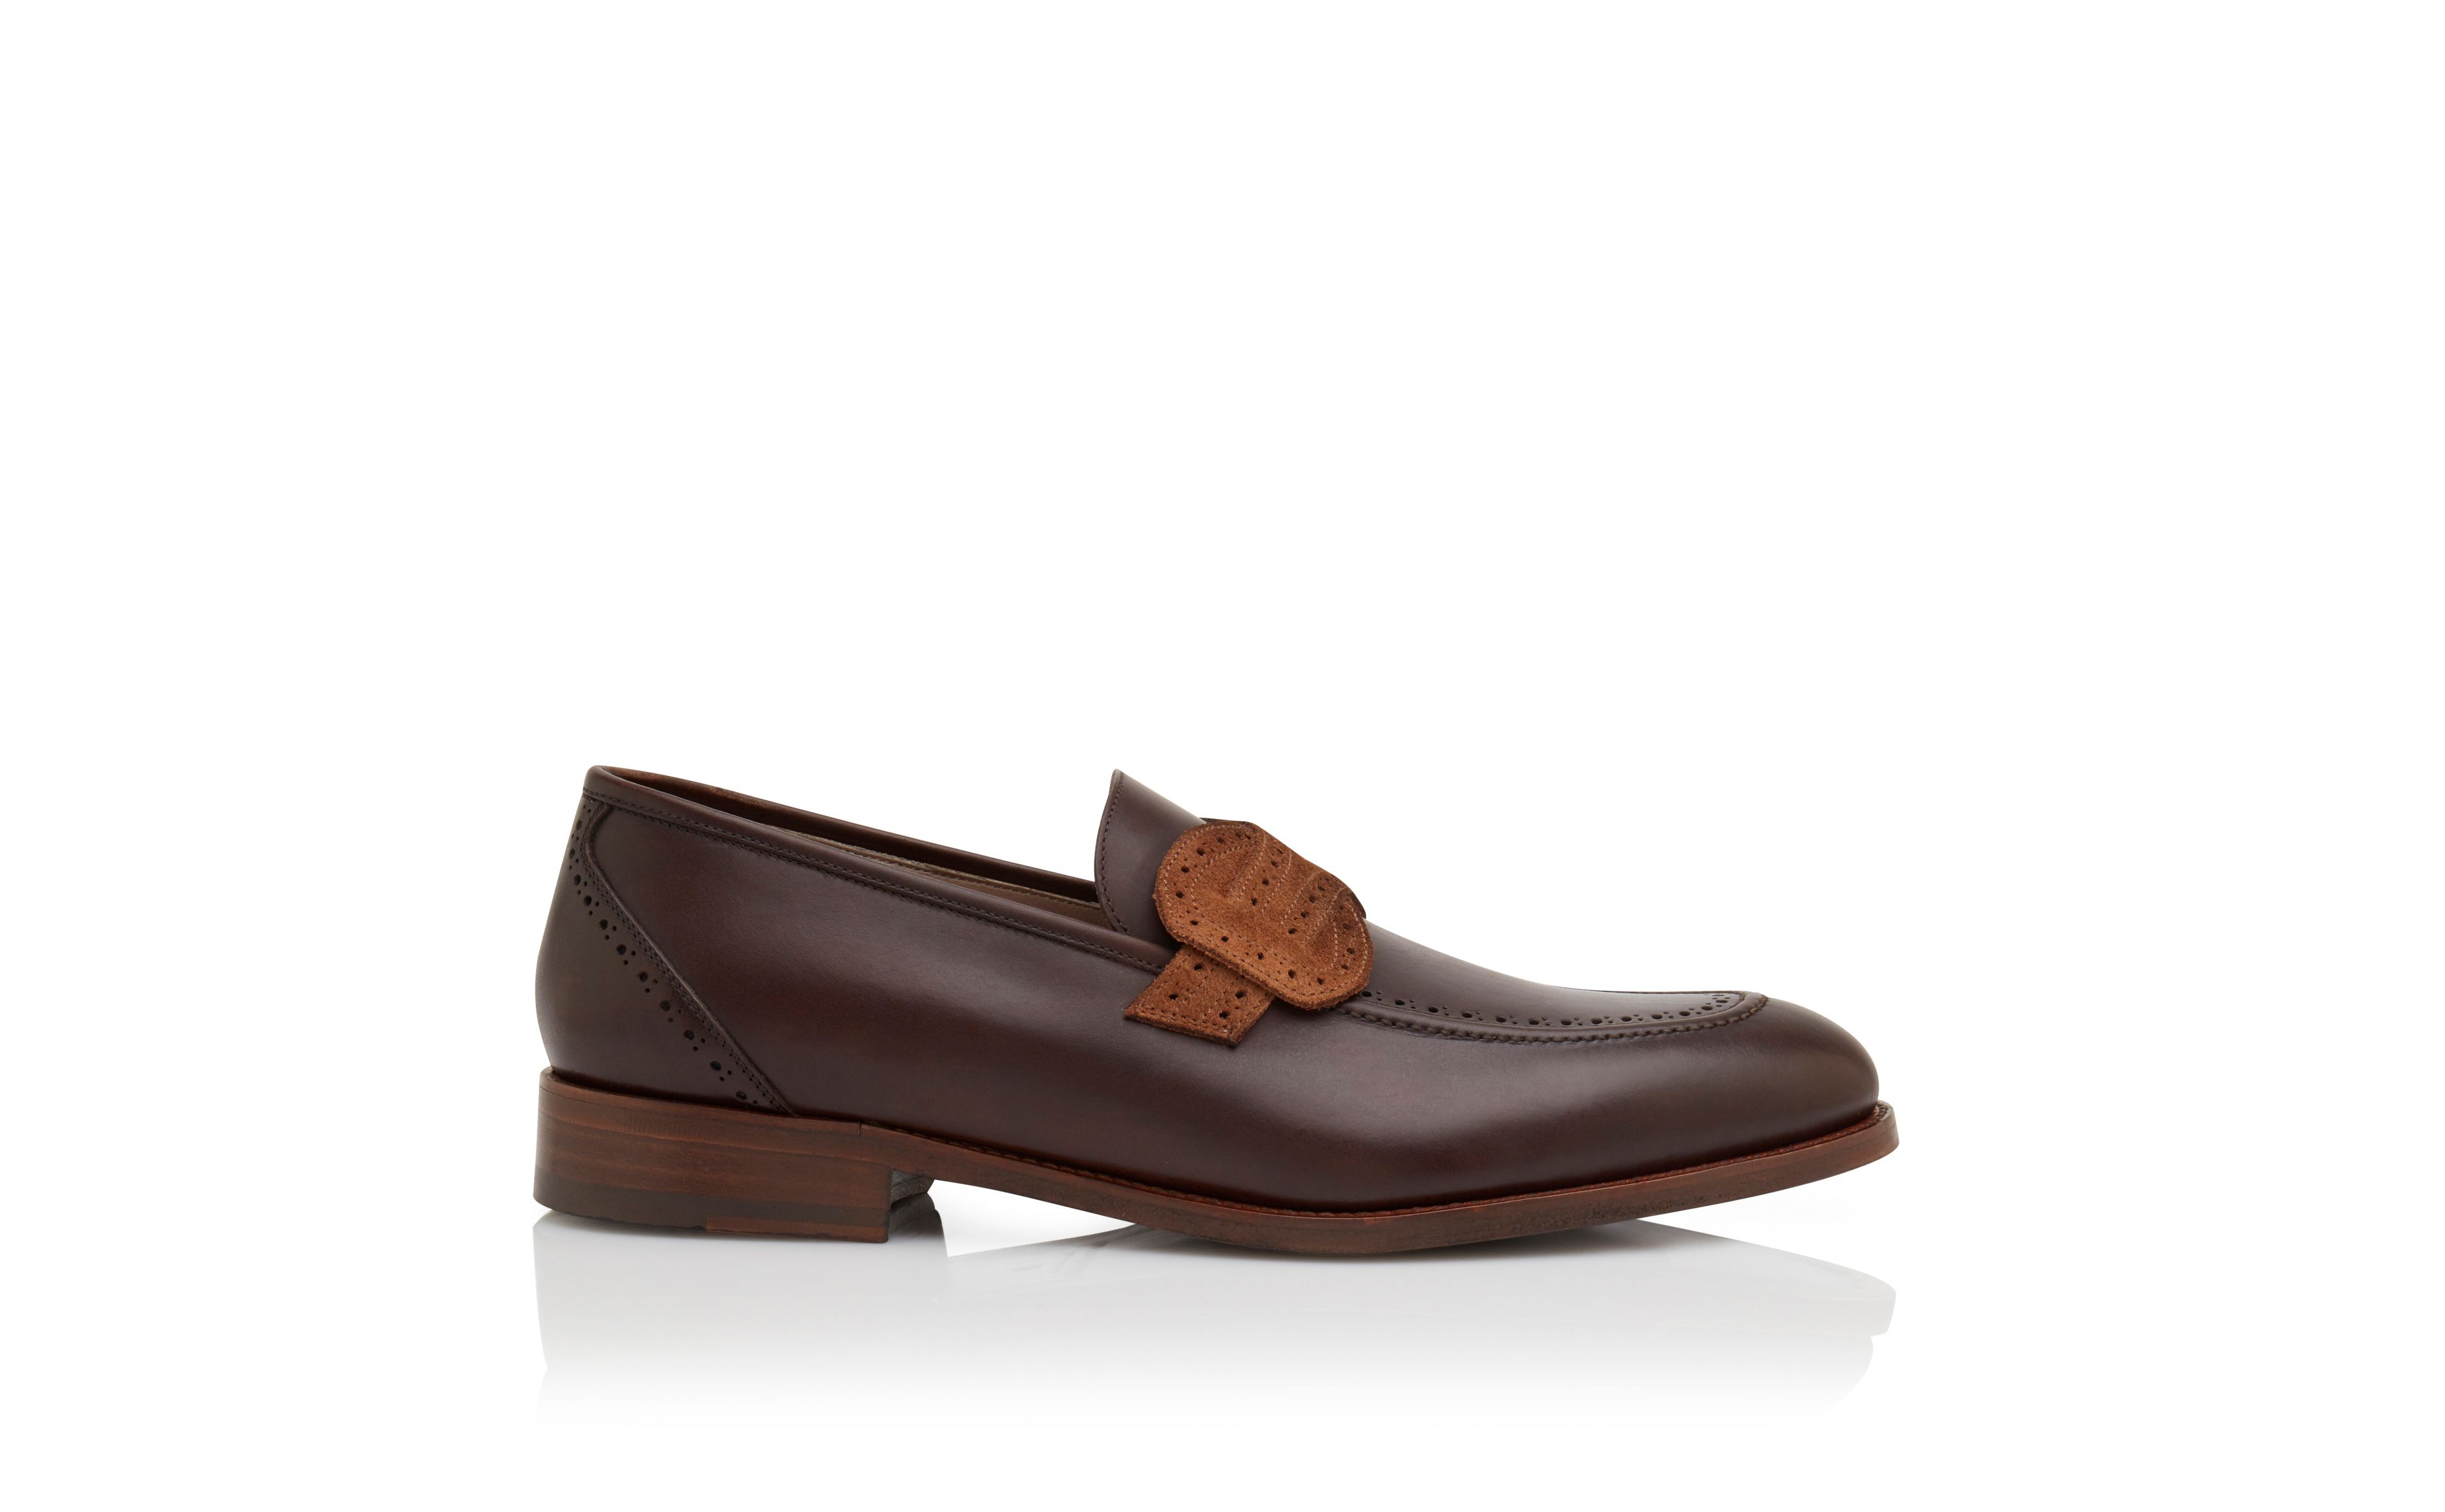 Designer Brown Calf Leather Loafers - Image Side View